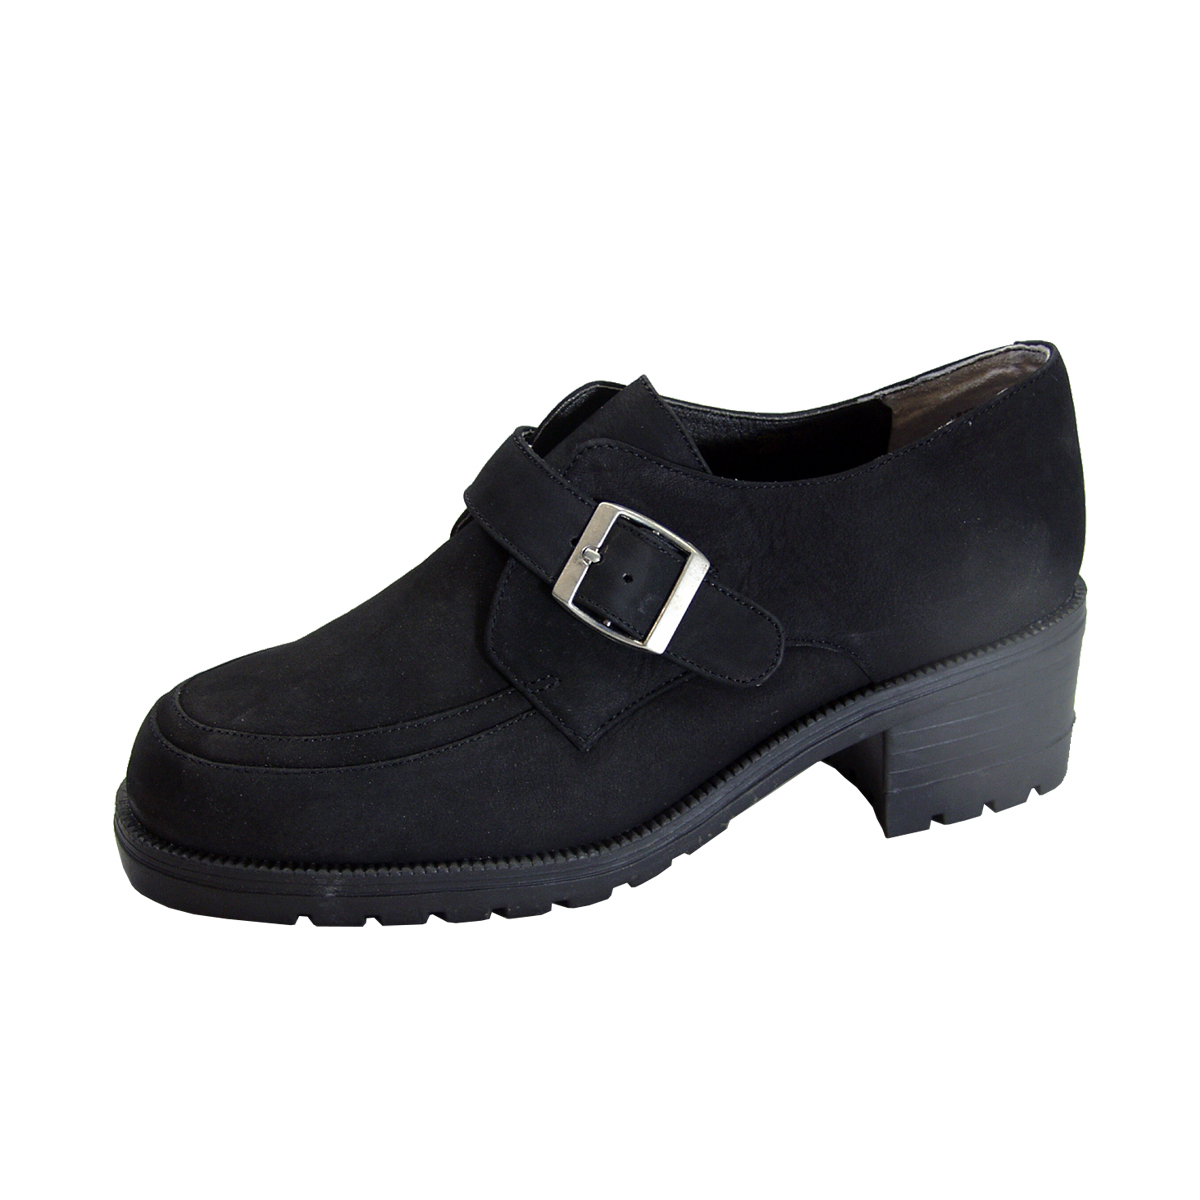 PEERAGE Iona Women's Wide Width Leather Shoes with Adjustable Buckle - $44.95